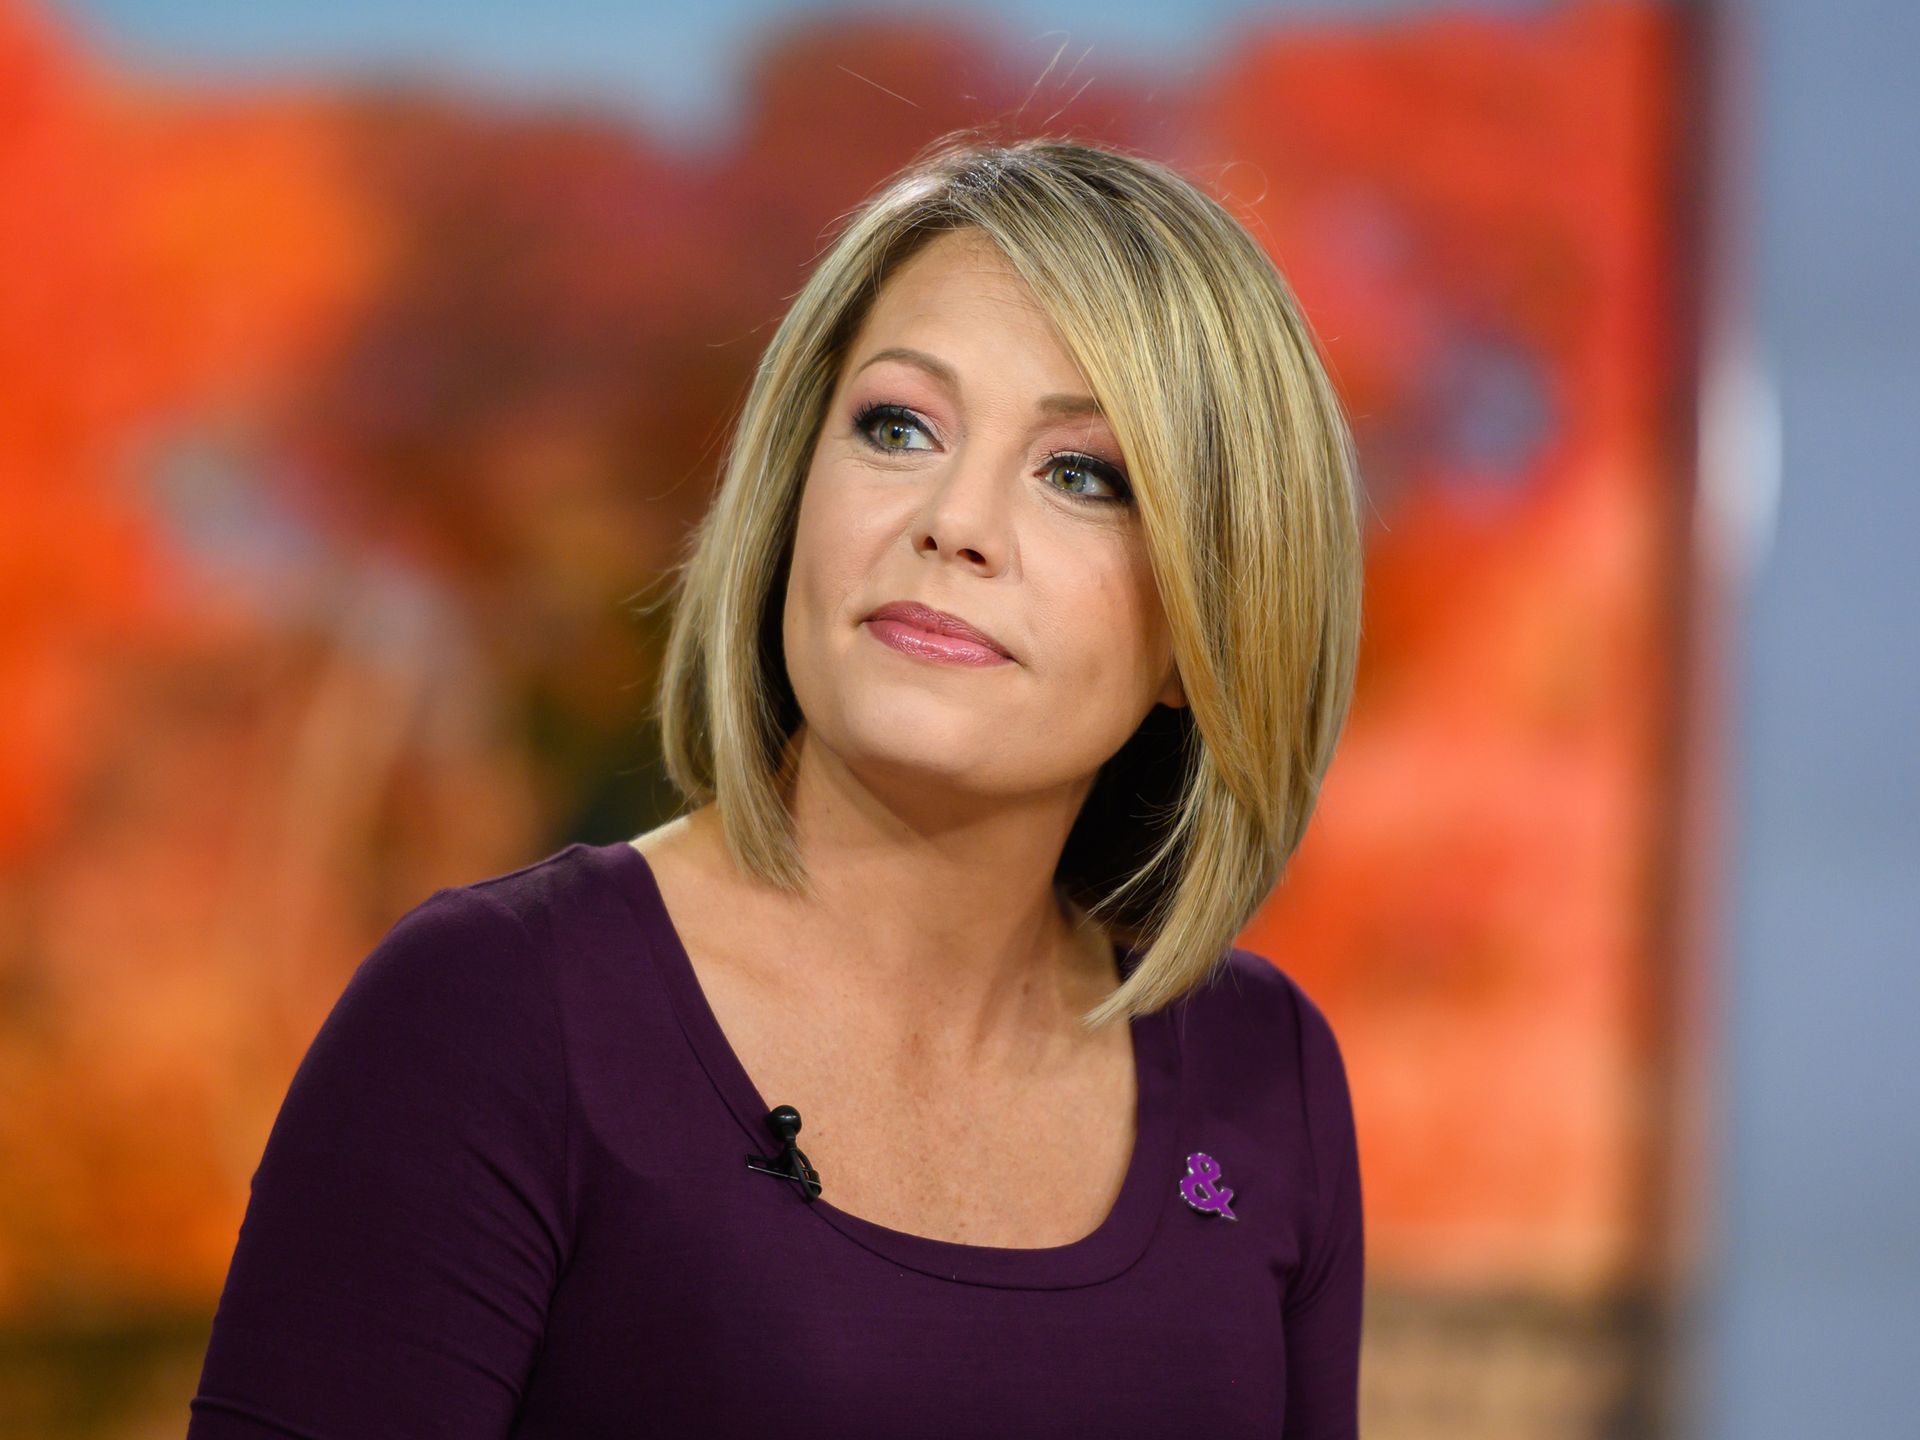 billy frisbie recommends dylan dreyer ass pic